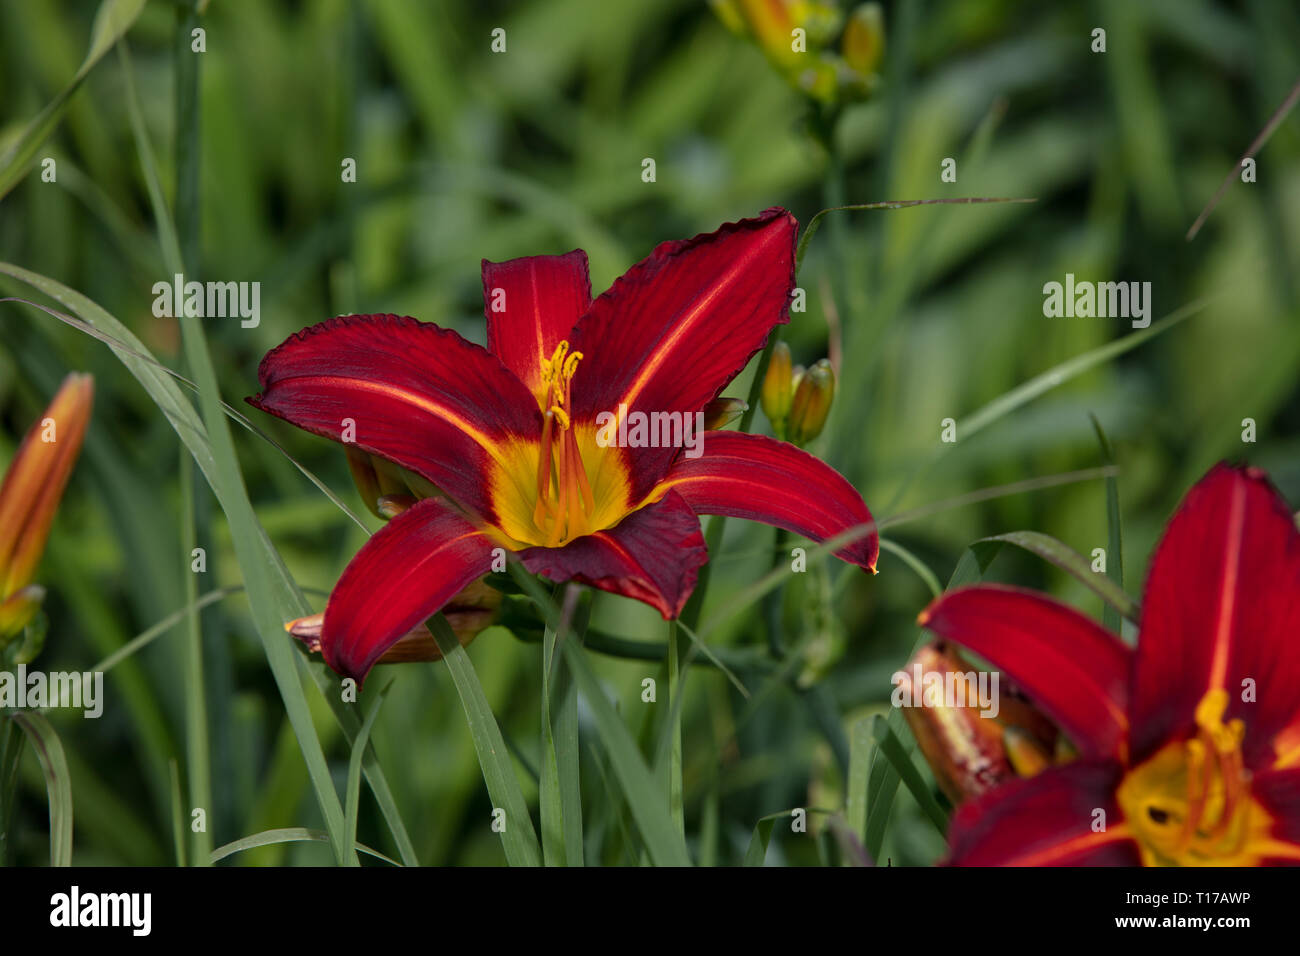 Hemerocallis Stafford or Day Lily, are deciduous perennial garden plants, with dark red flowers, yellow stripes and golden centre flowering in summer. Stock Photo